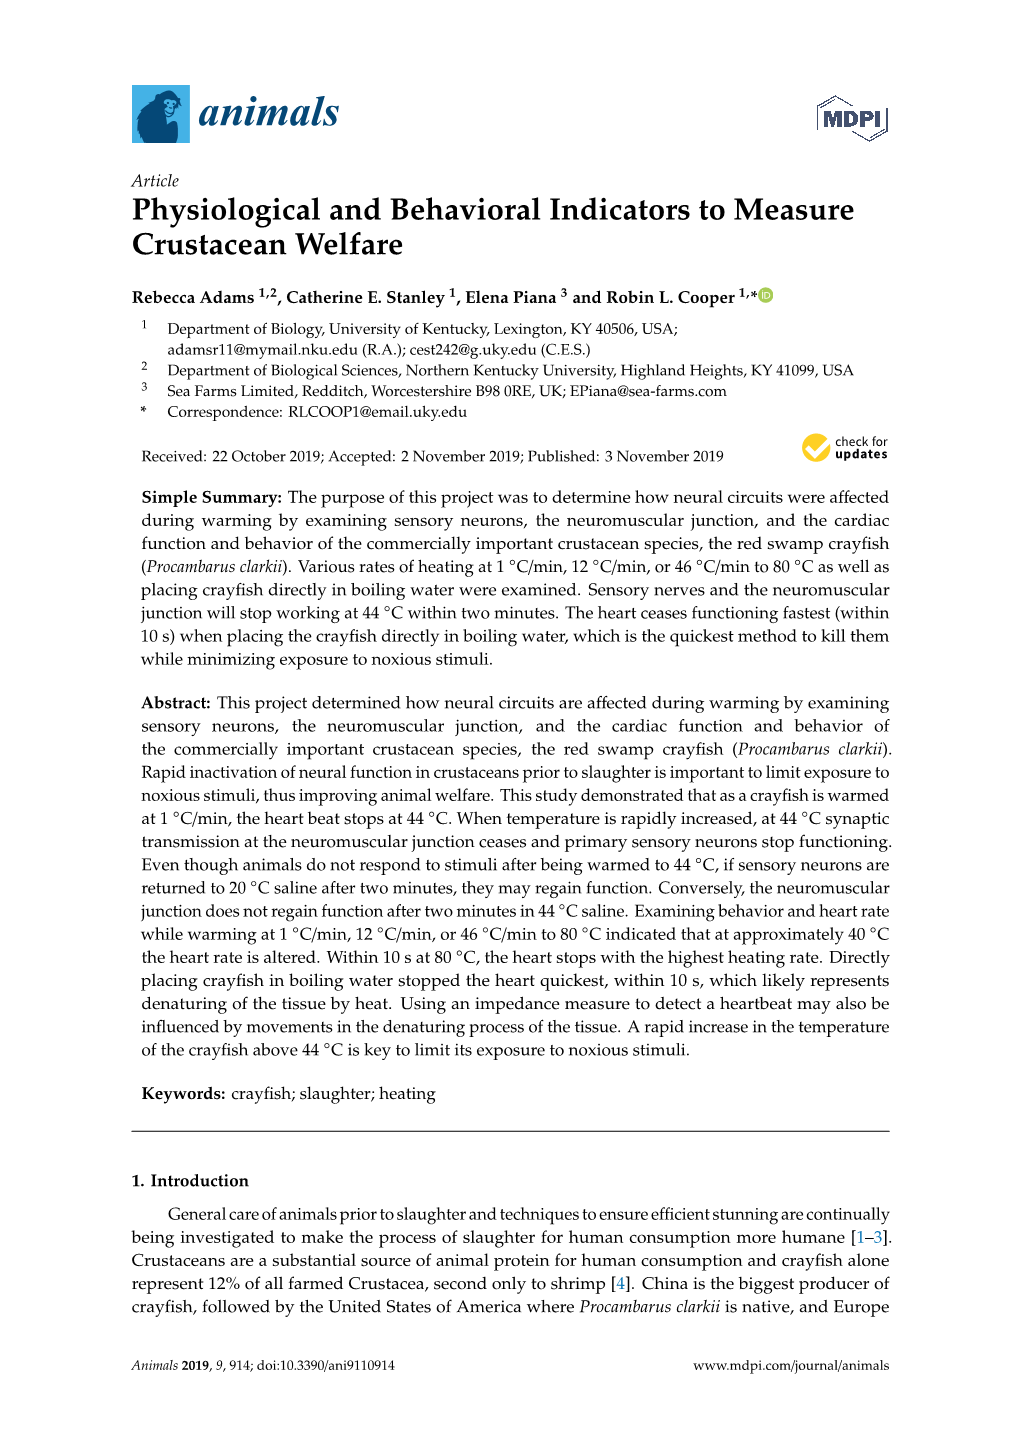 Physiological and Behavioral Indicators to Measure Crustacean Welfare